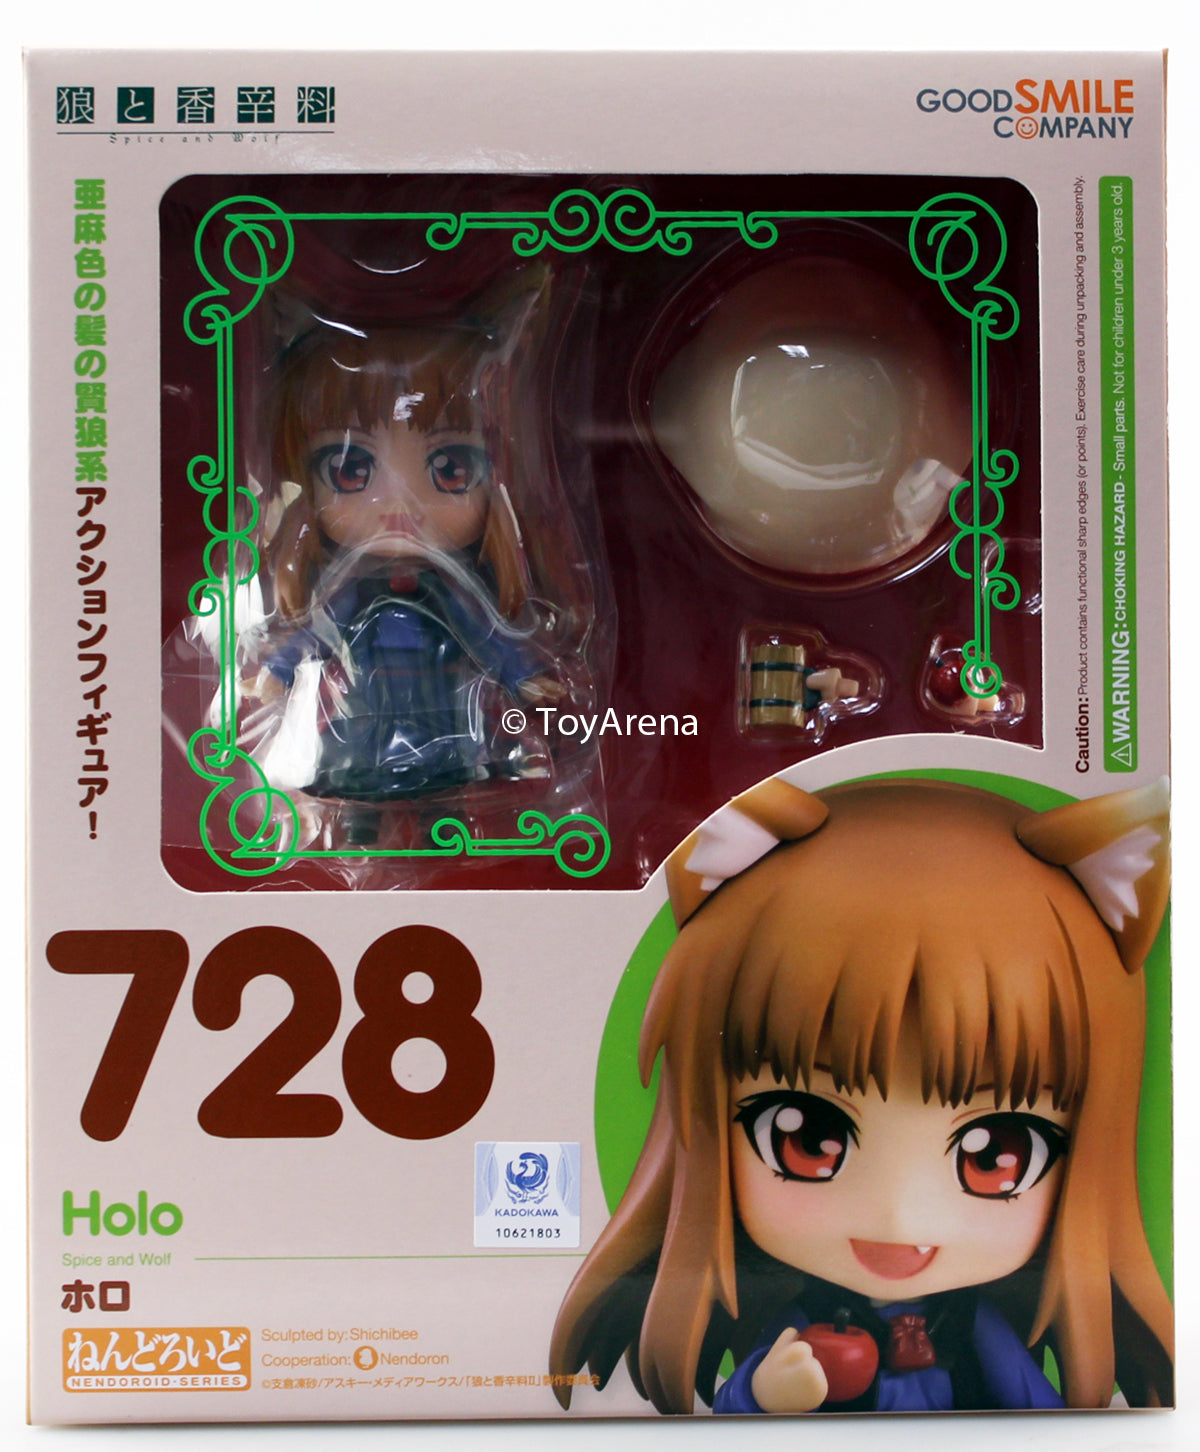 Nendoroid #728 Holo Spice and Wolf